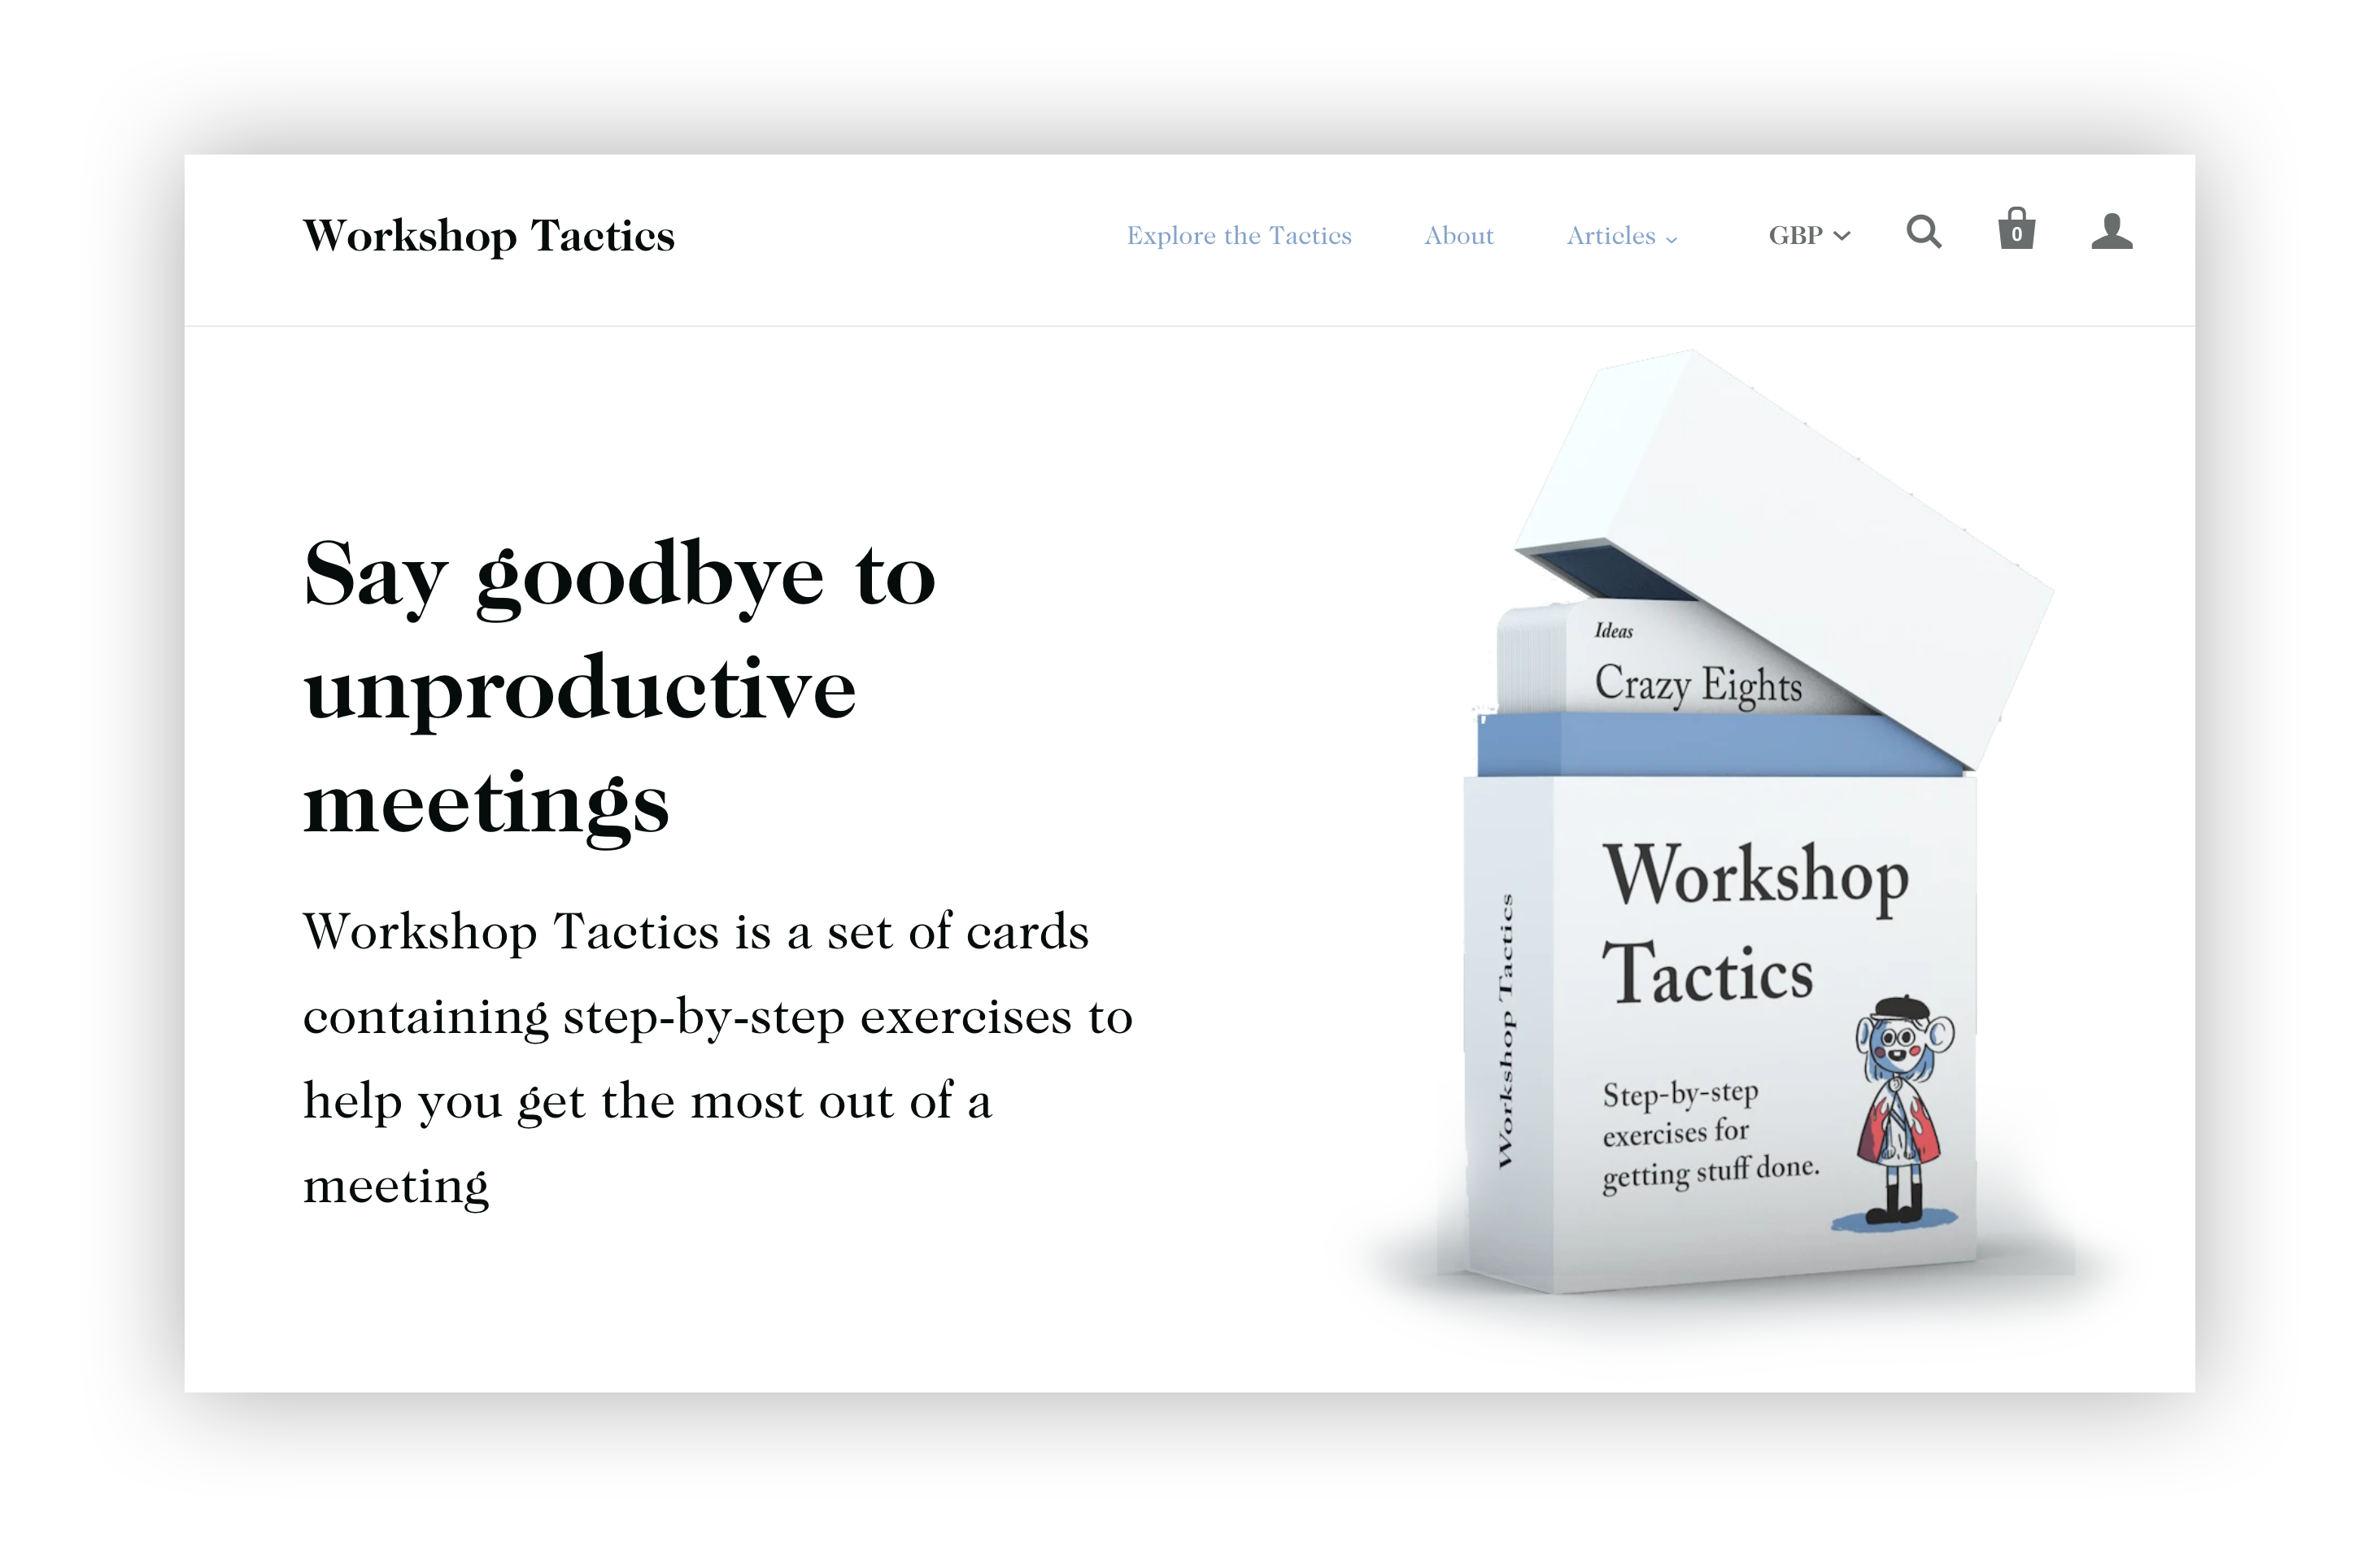 An early version of the Workshop Tactics landing page